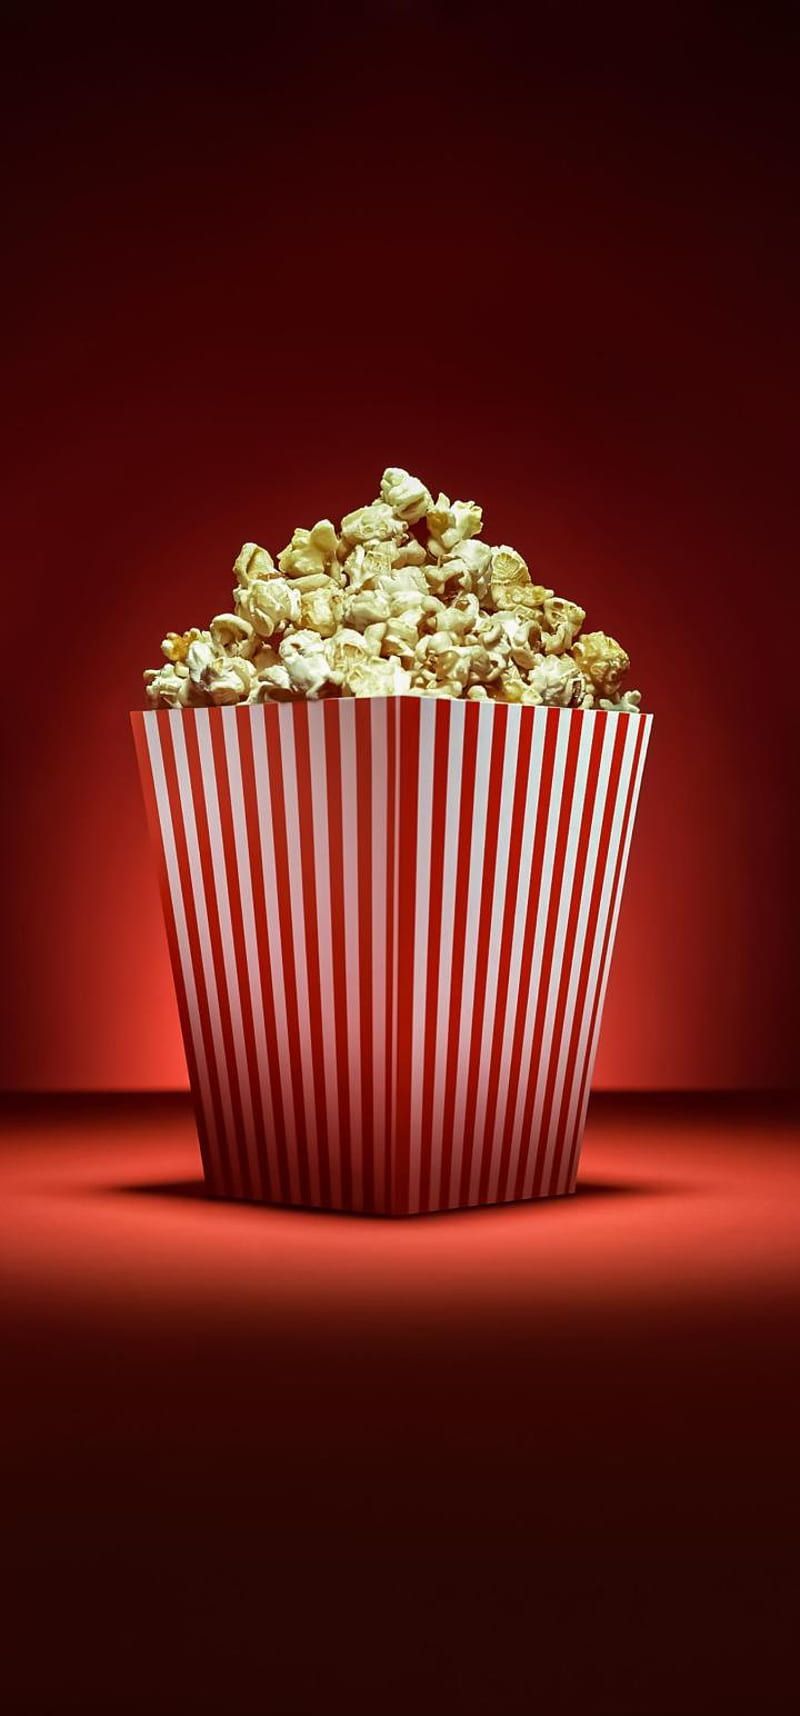 A bucket of popcorn on a red background - Popcorn